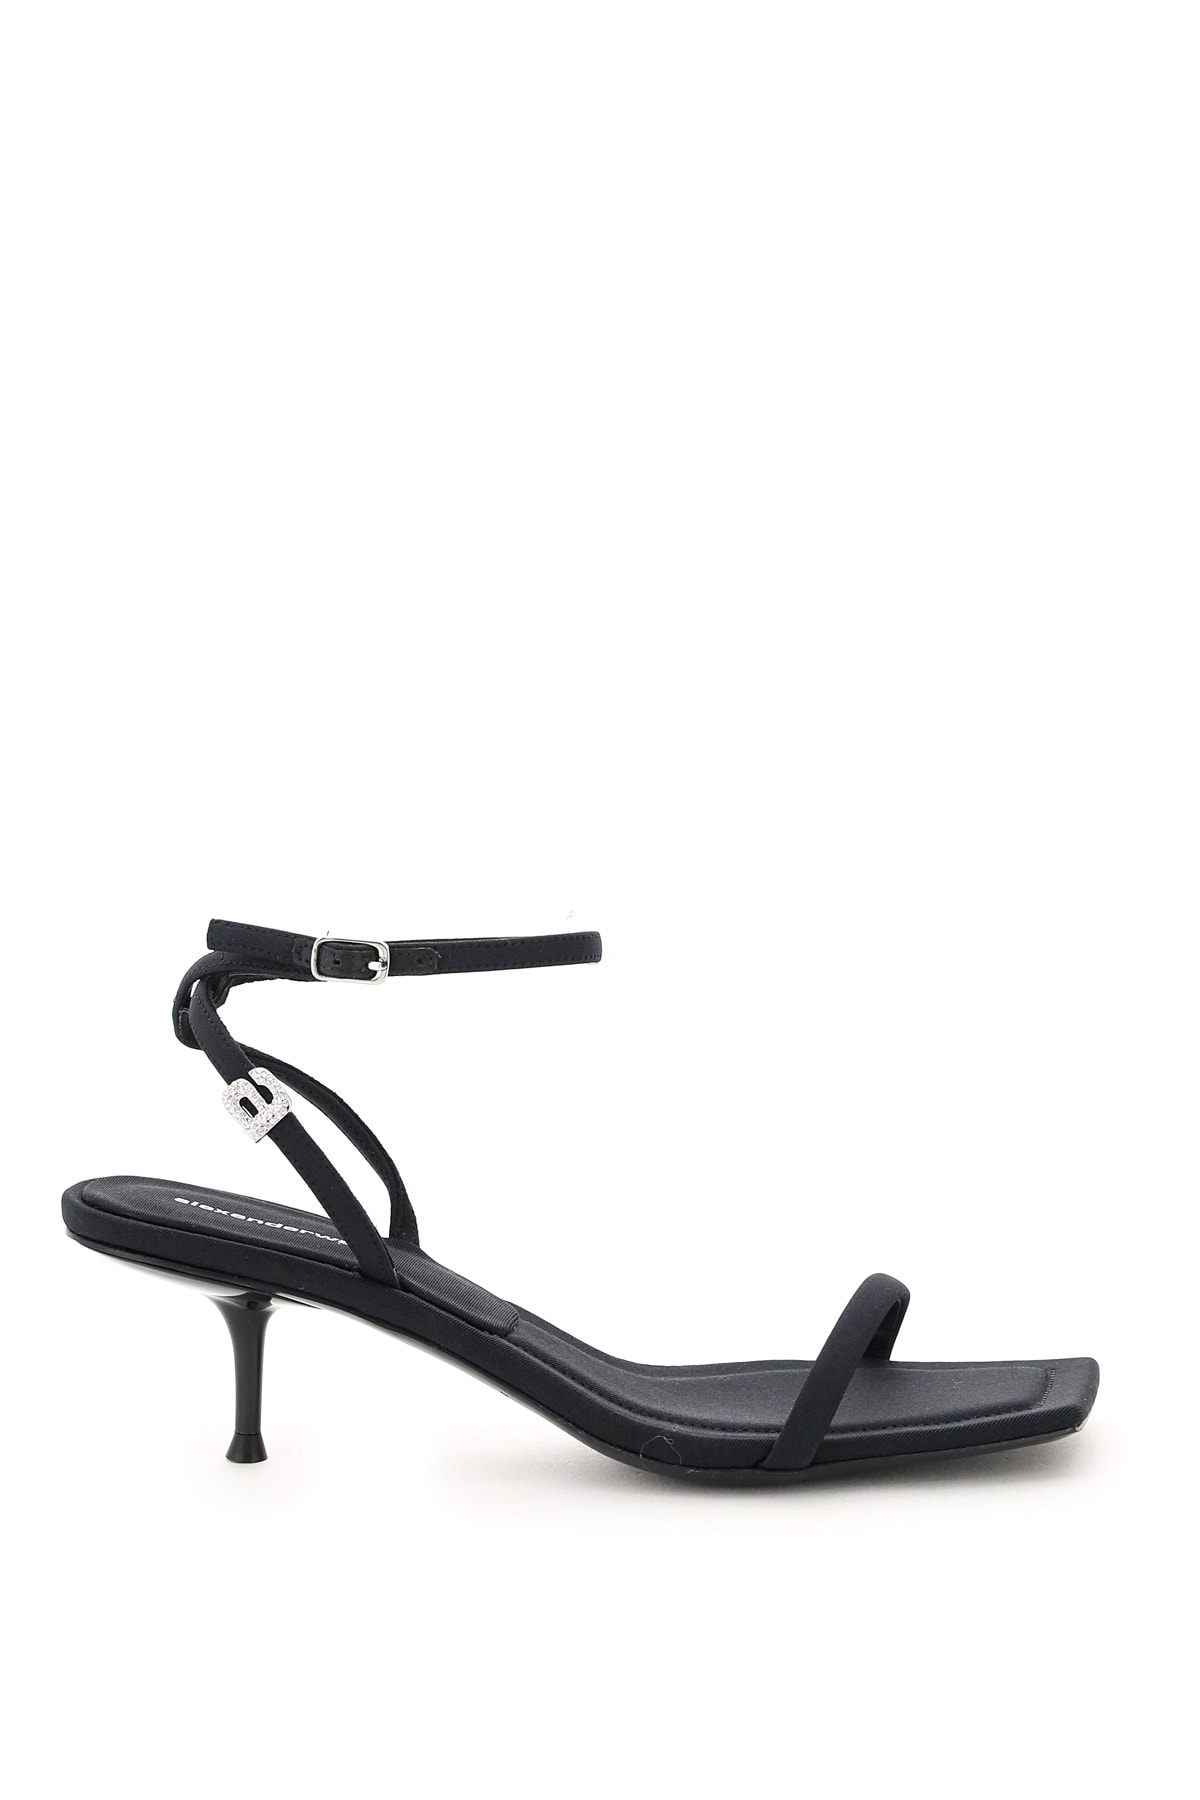 Buy Alexander Wang Jessie Sandals Crystal Logo online, shop Alexander Wang shoes with free shipping